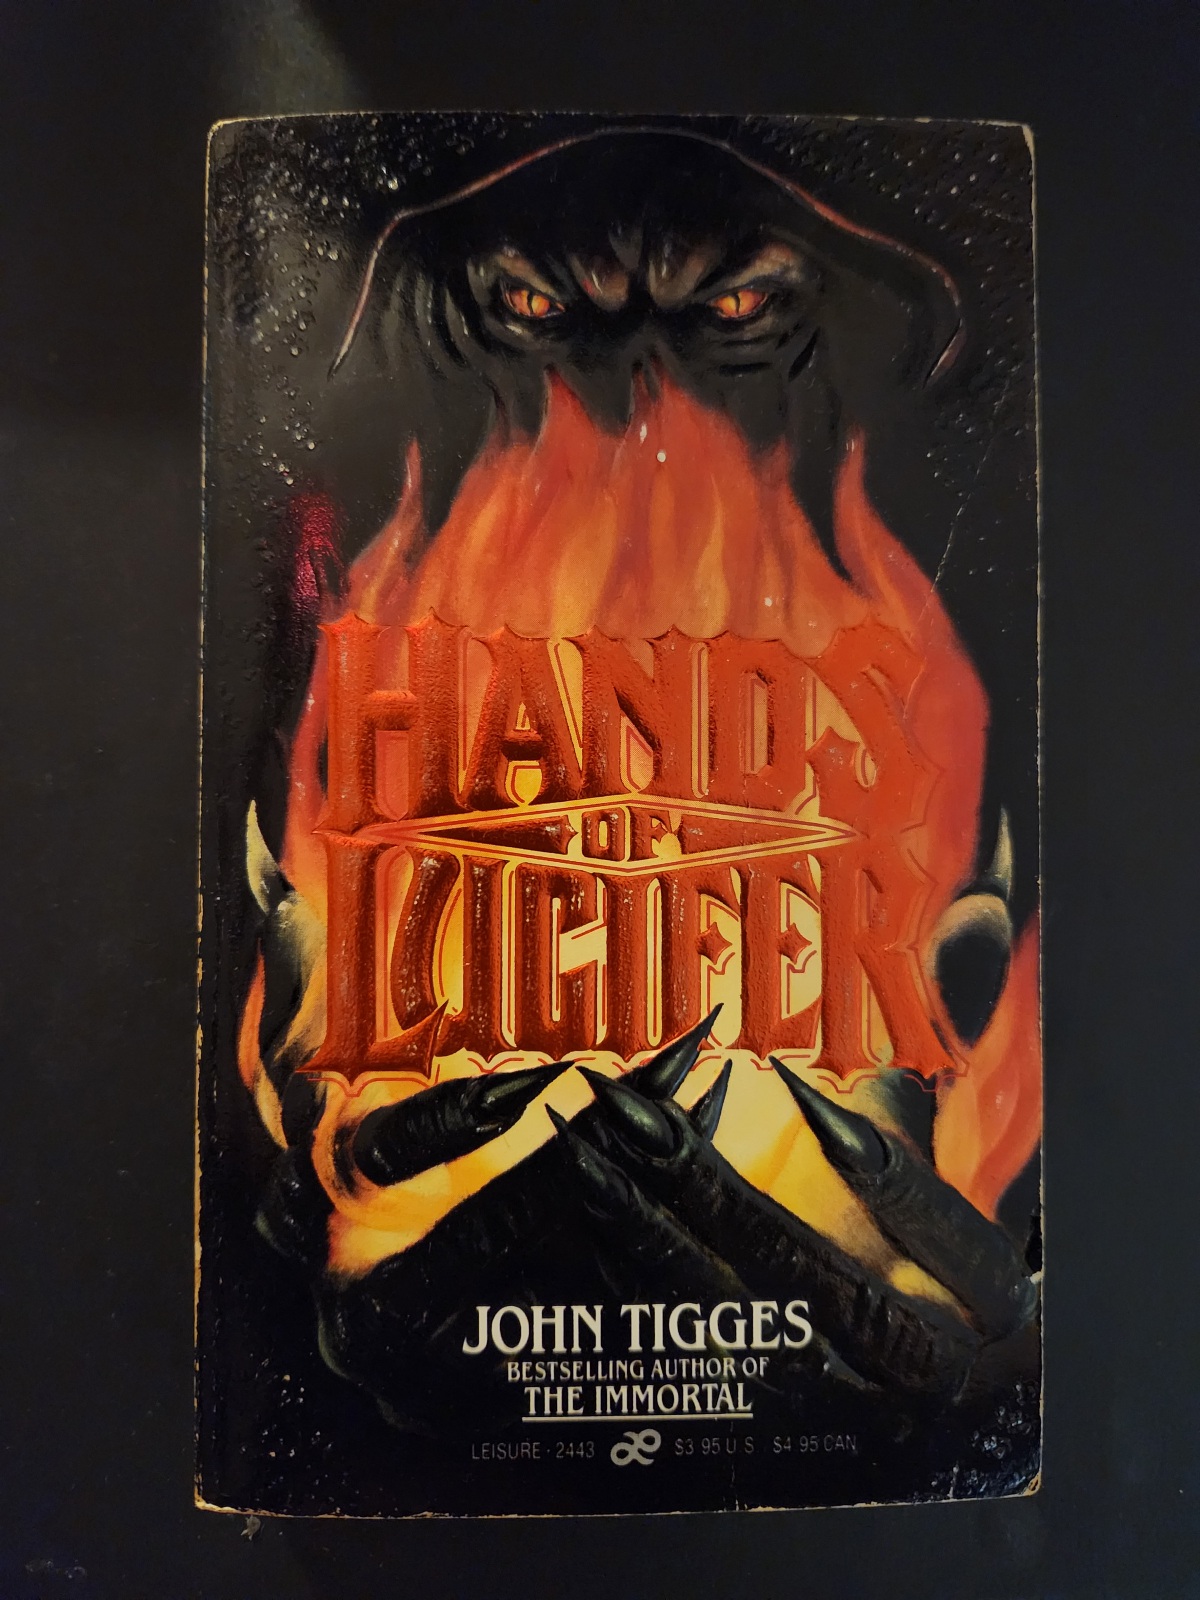 Hands of Lucifer by John Tigges 1987 Leisure Horror Paperback